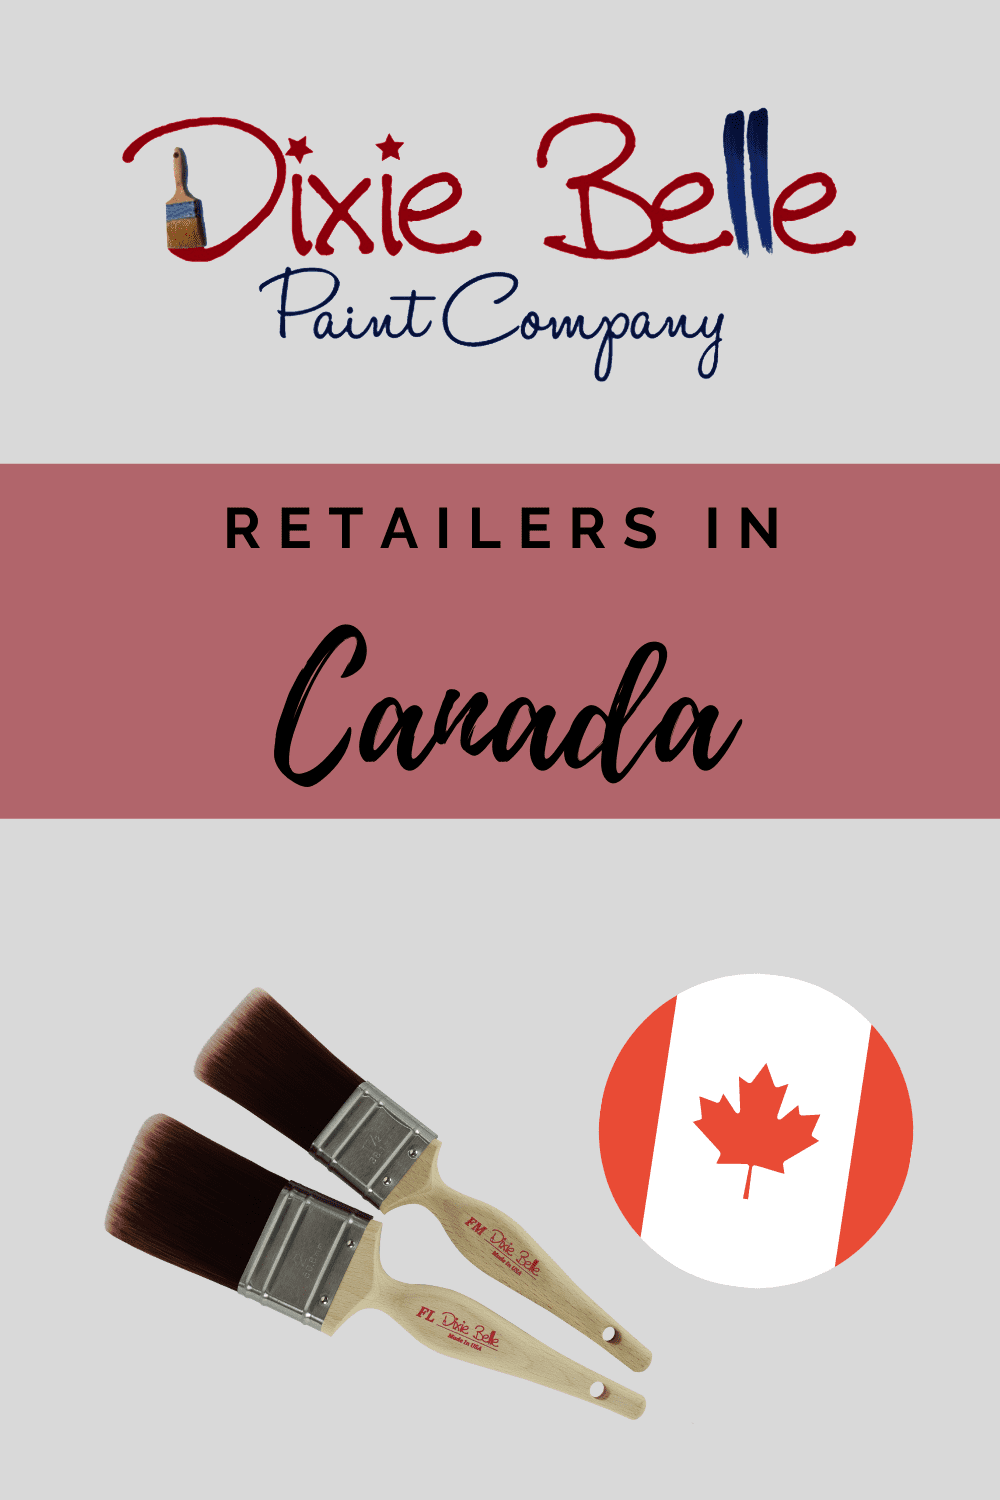 Retailers in Canada